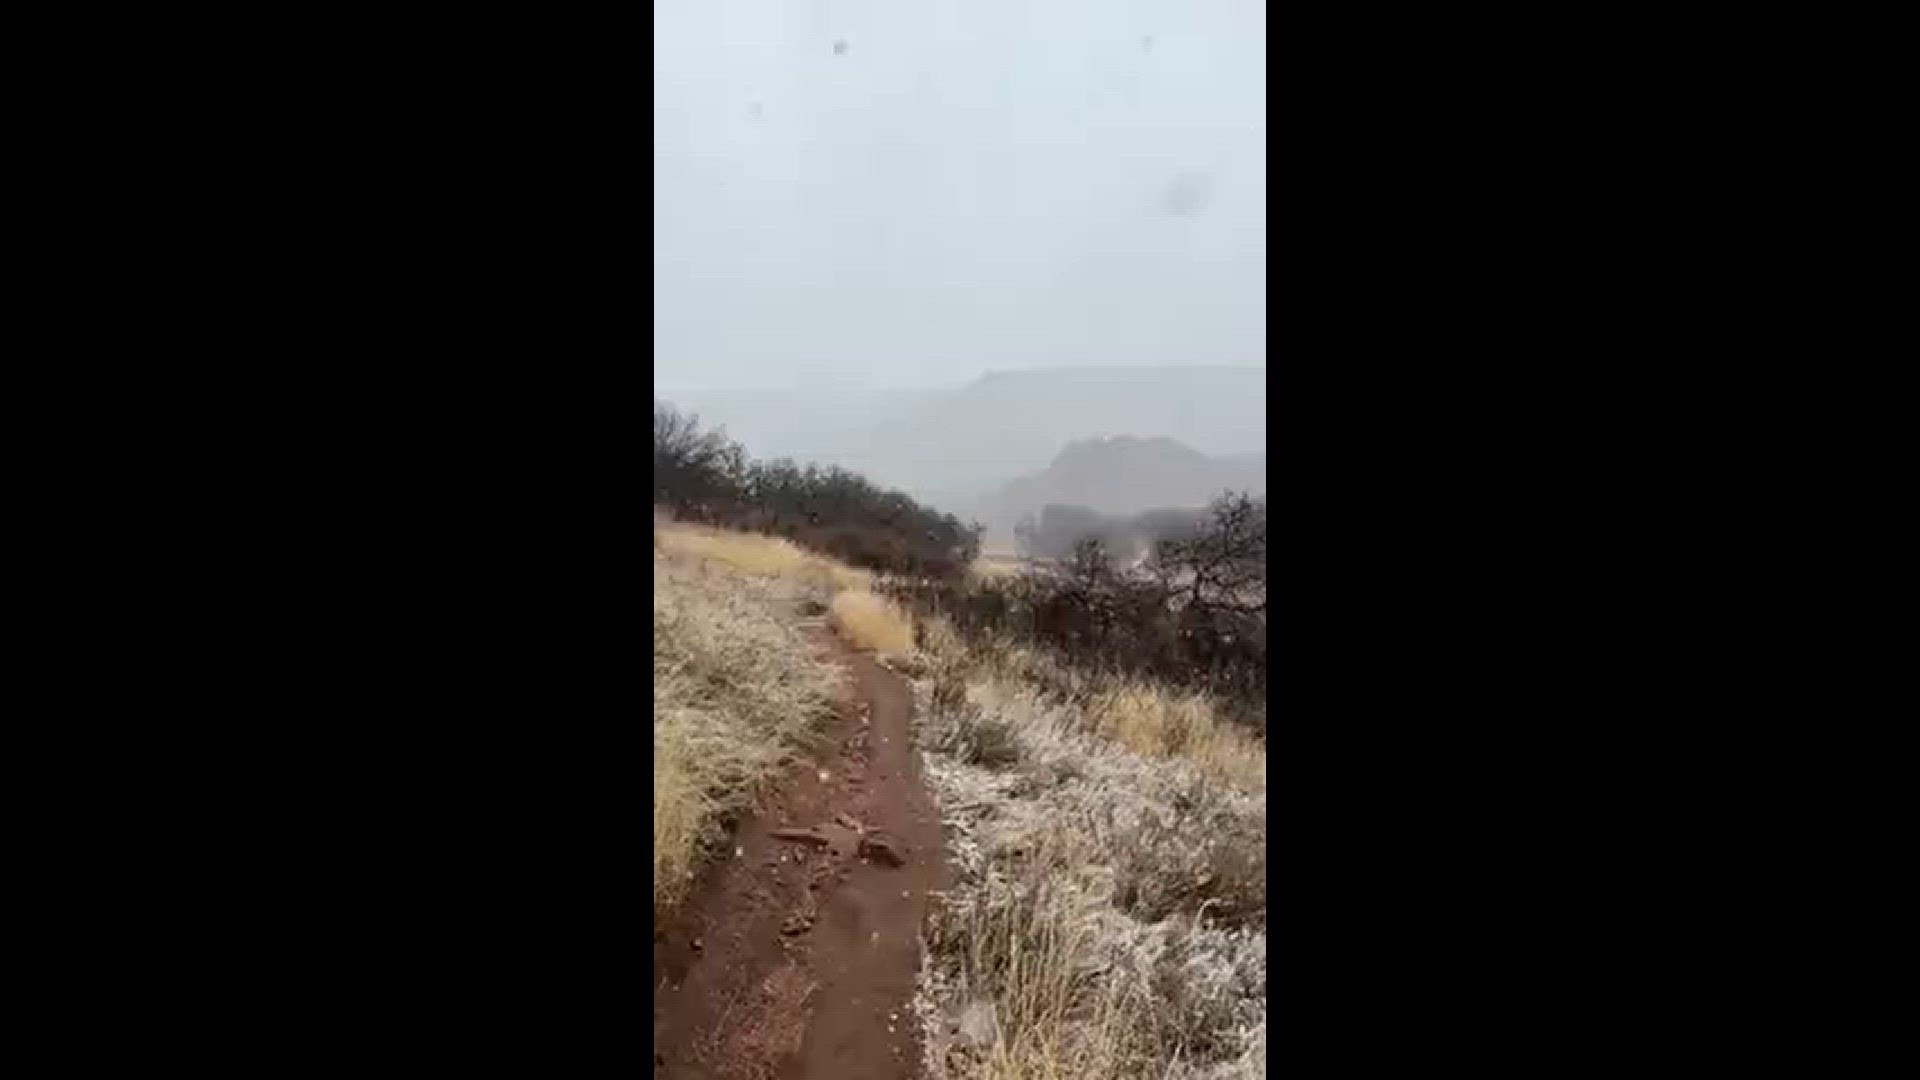 I started on the trail to Carpenter’s Peak around 10:15- by 10:30 it was snowing pretty good!
Credit: Julie Romano